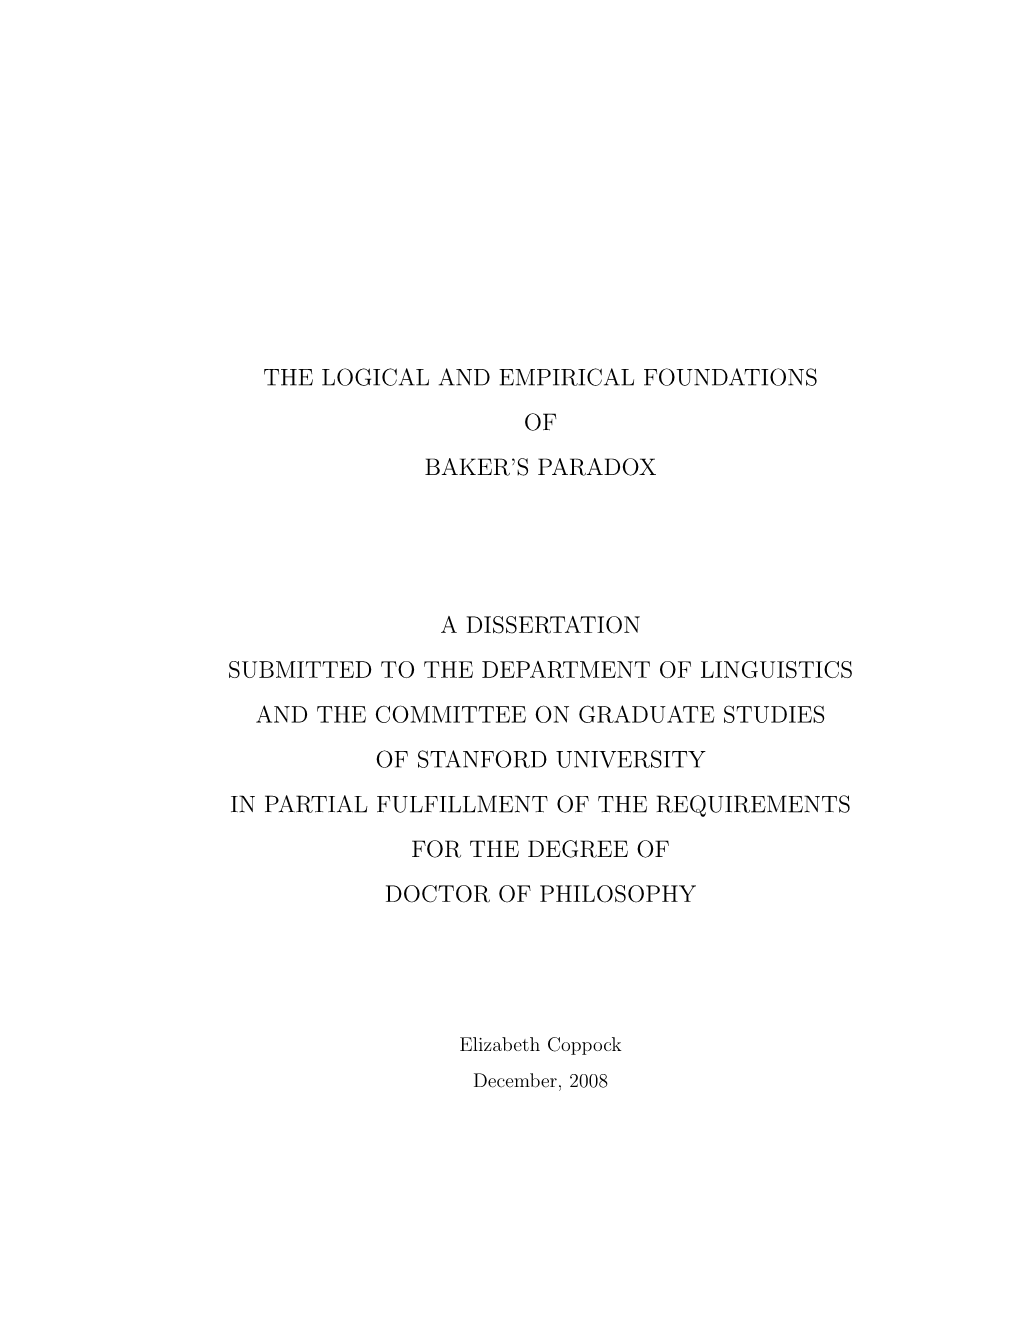 The Logical and Empirical Foundations of Baker's